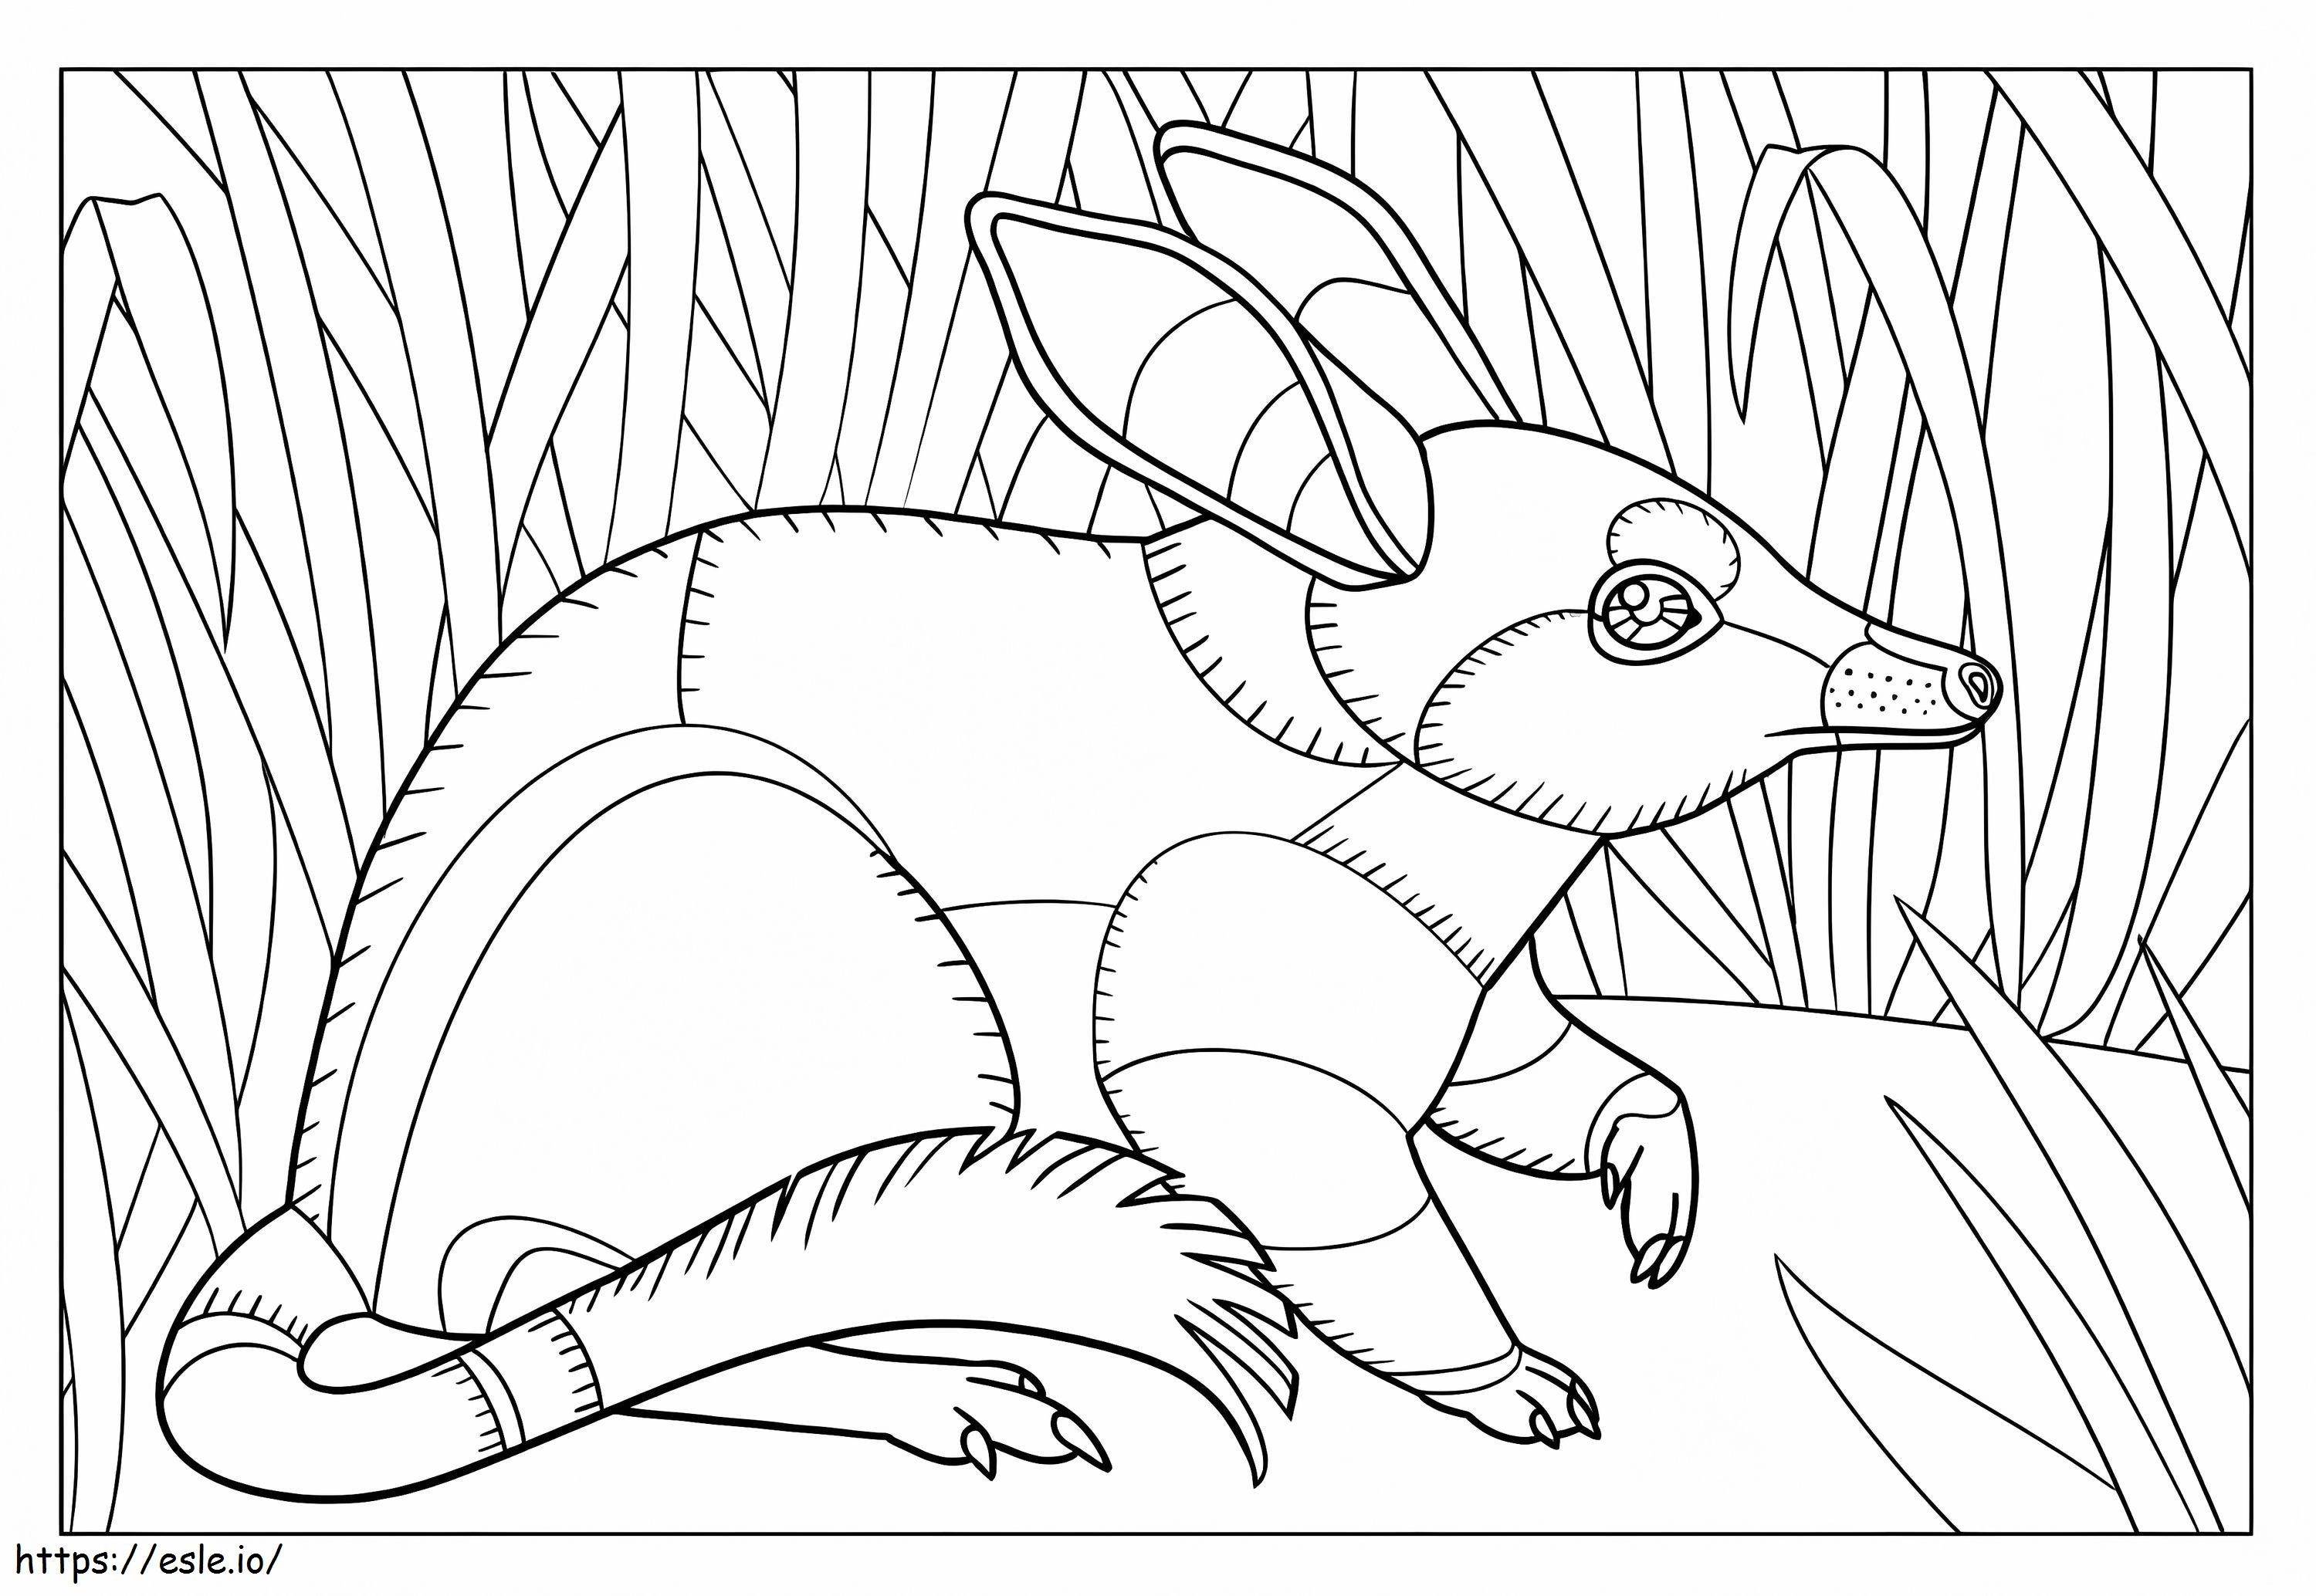 Abstract Bilby coloring page